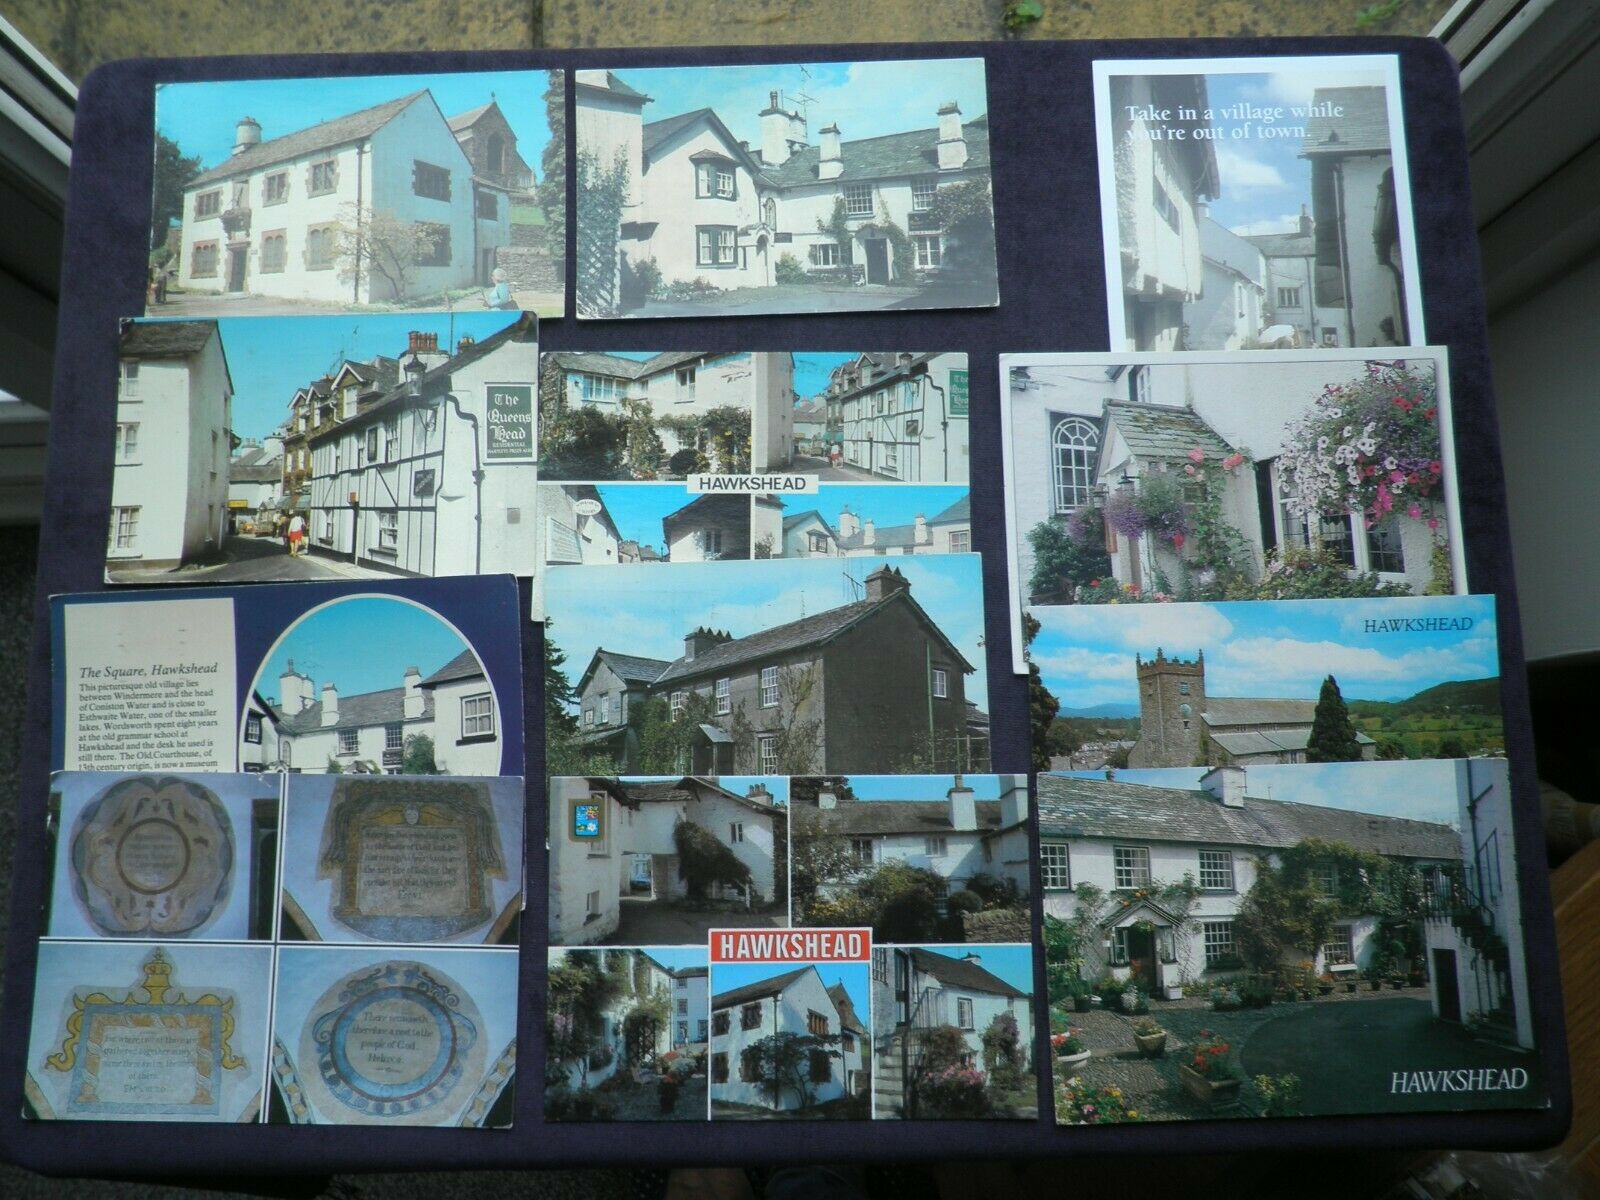 House Clearance - 12 Services of Hawkshead, Anne Tyson's House, The Square, Old Grammar School